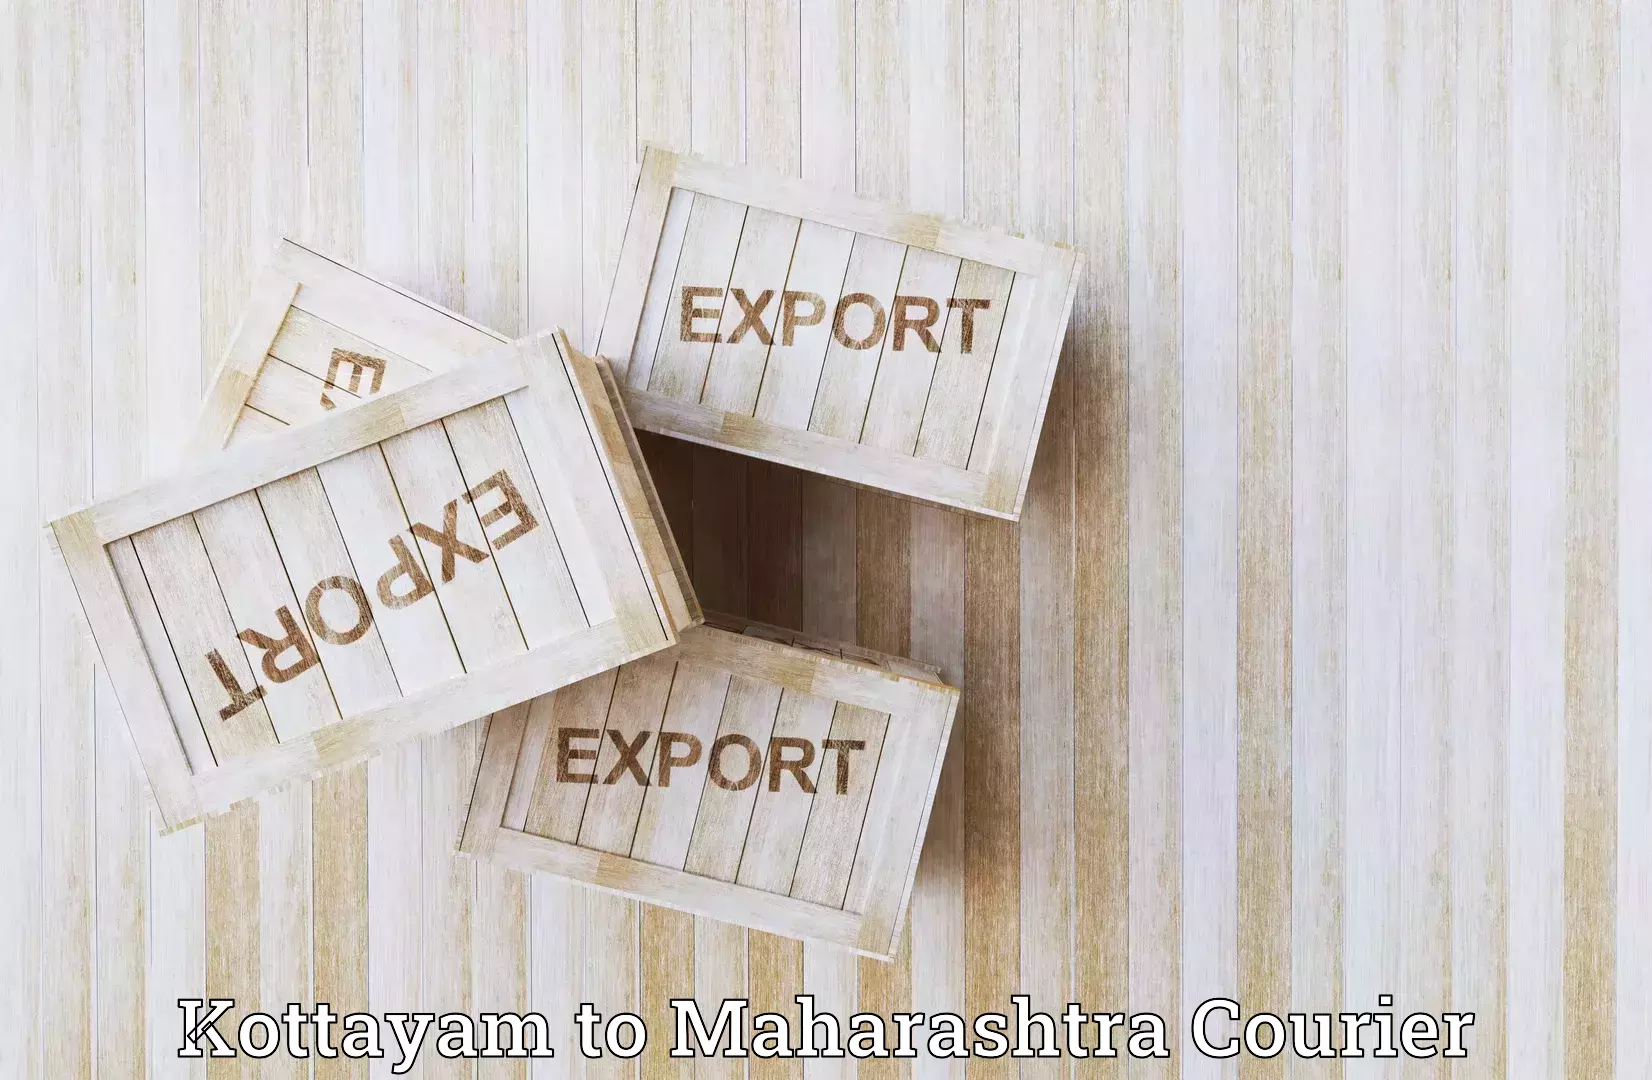 Global shipping networks Kottayam to Mukhed